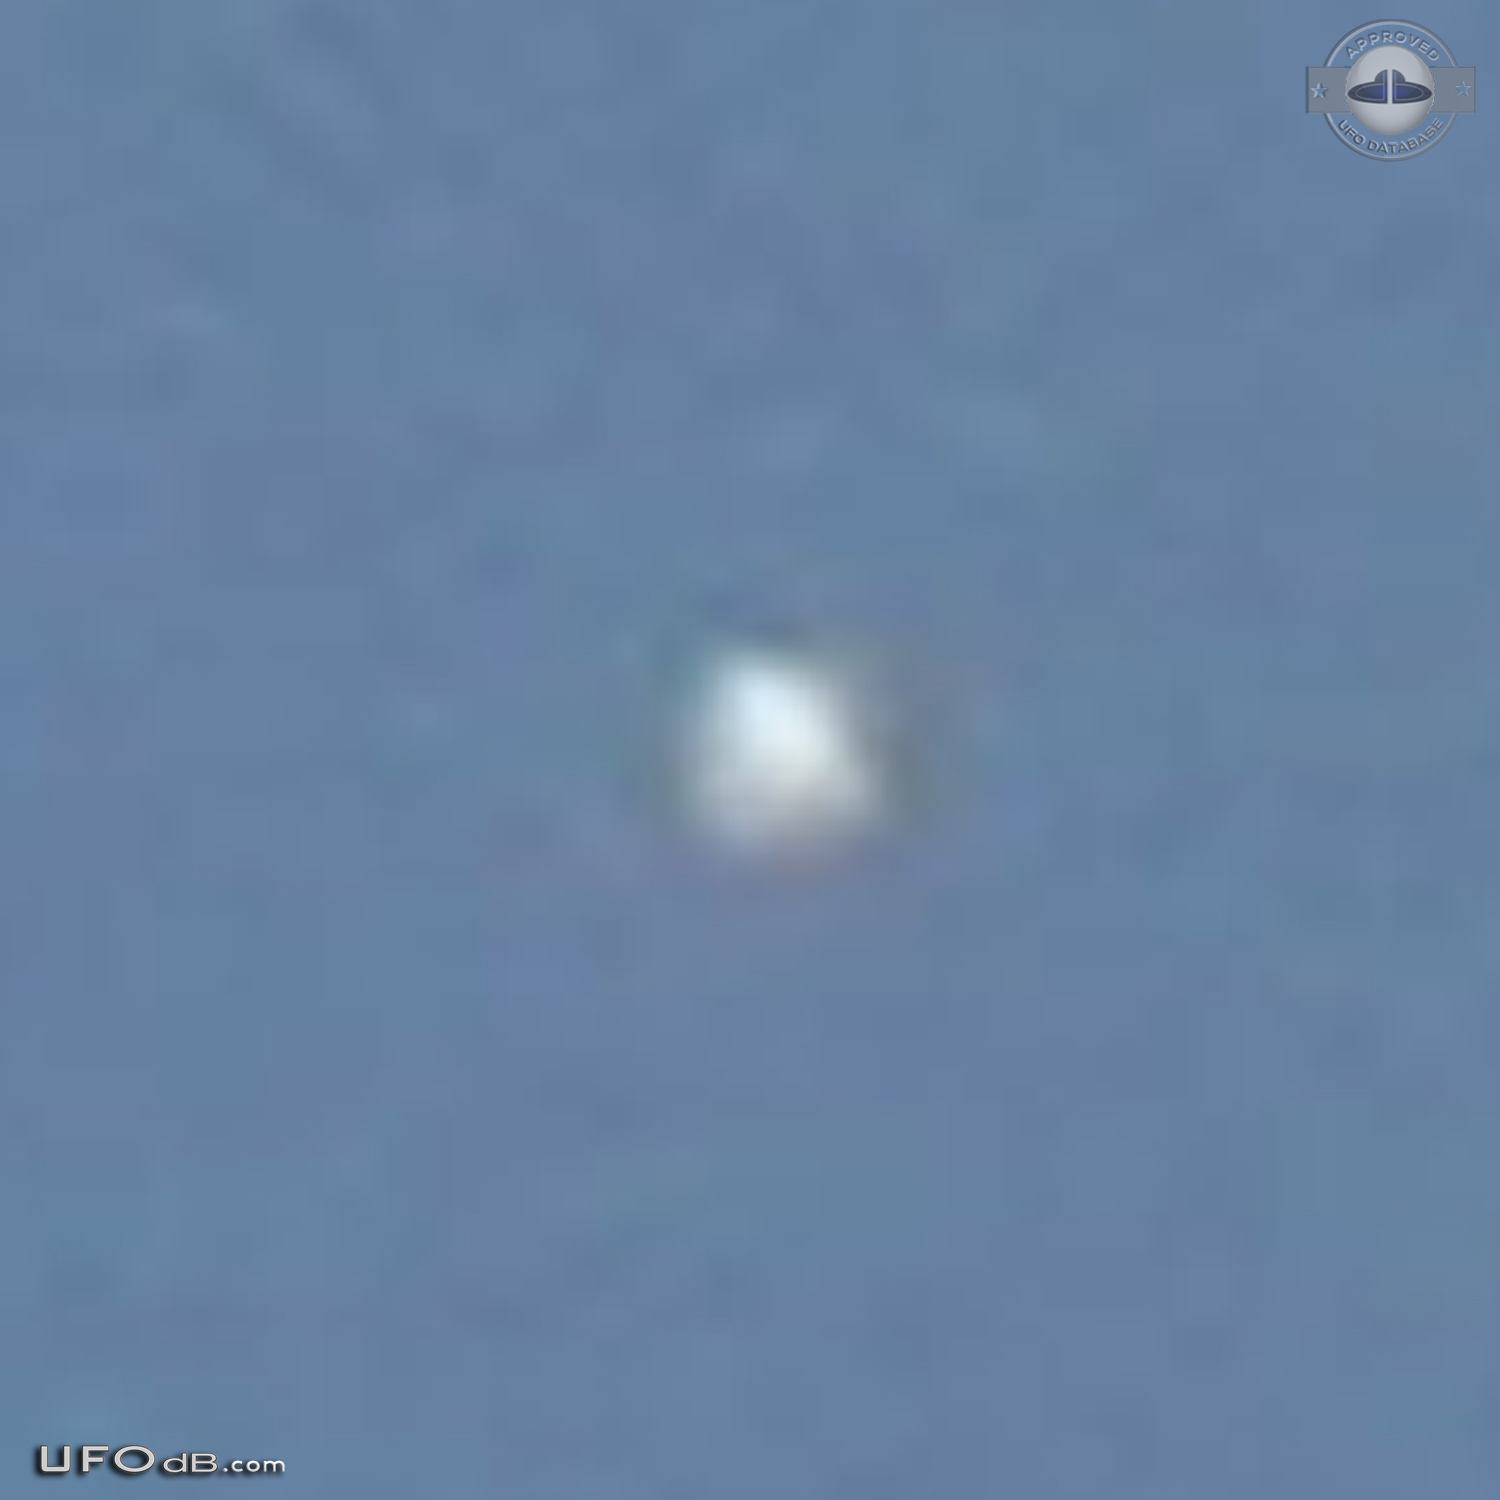 Sphere UFO in bright daylight caught on photo over Vienna Austria 2011 UFO Picture #494-3